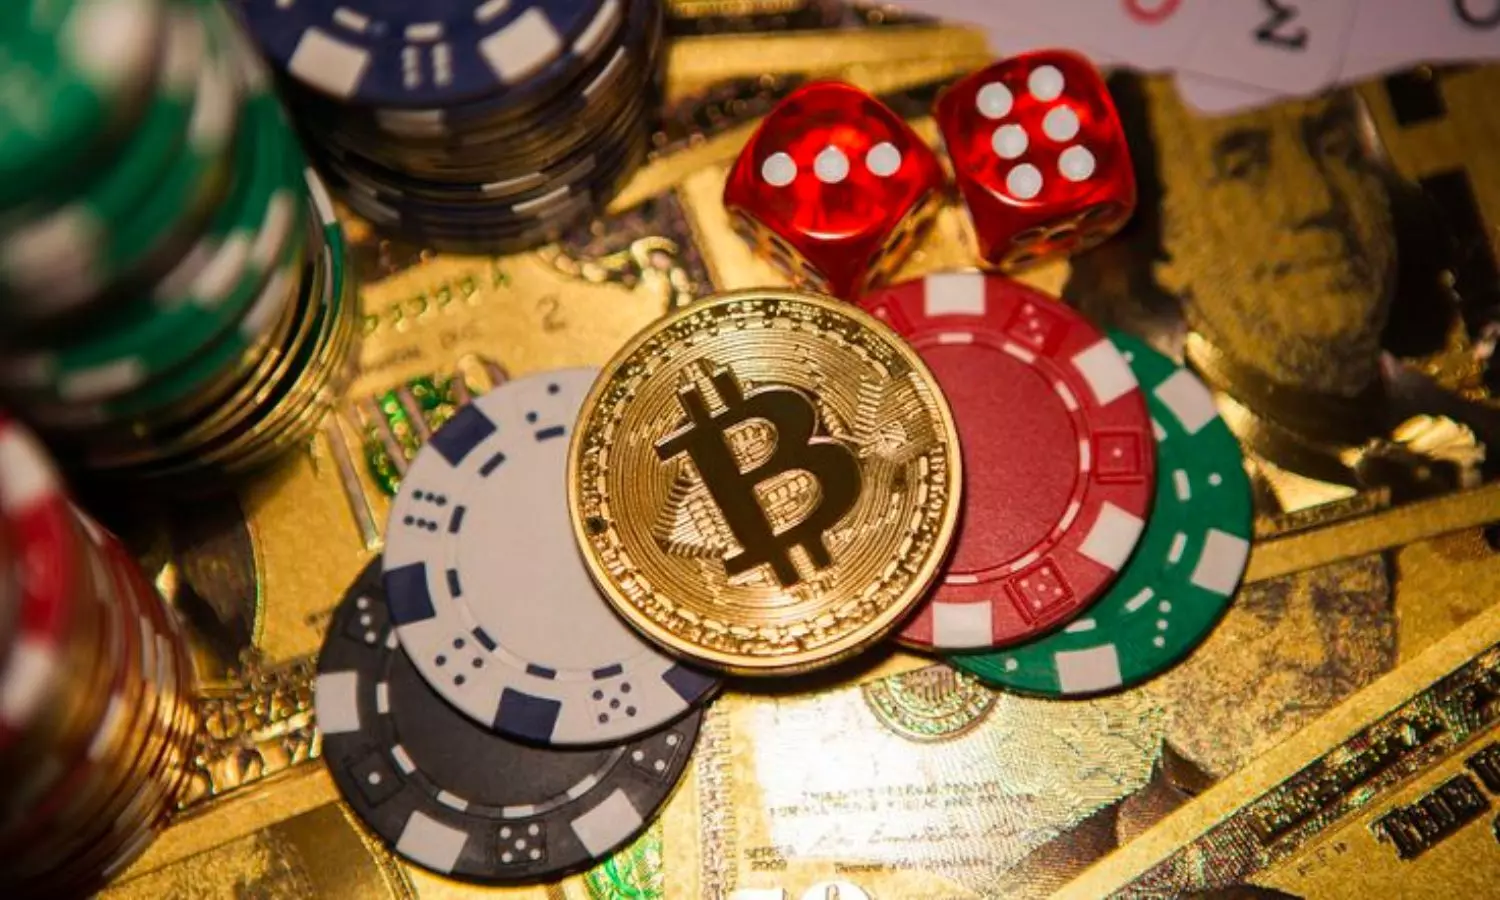 play bitcoin casino And Other Products